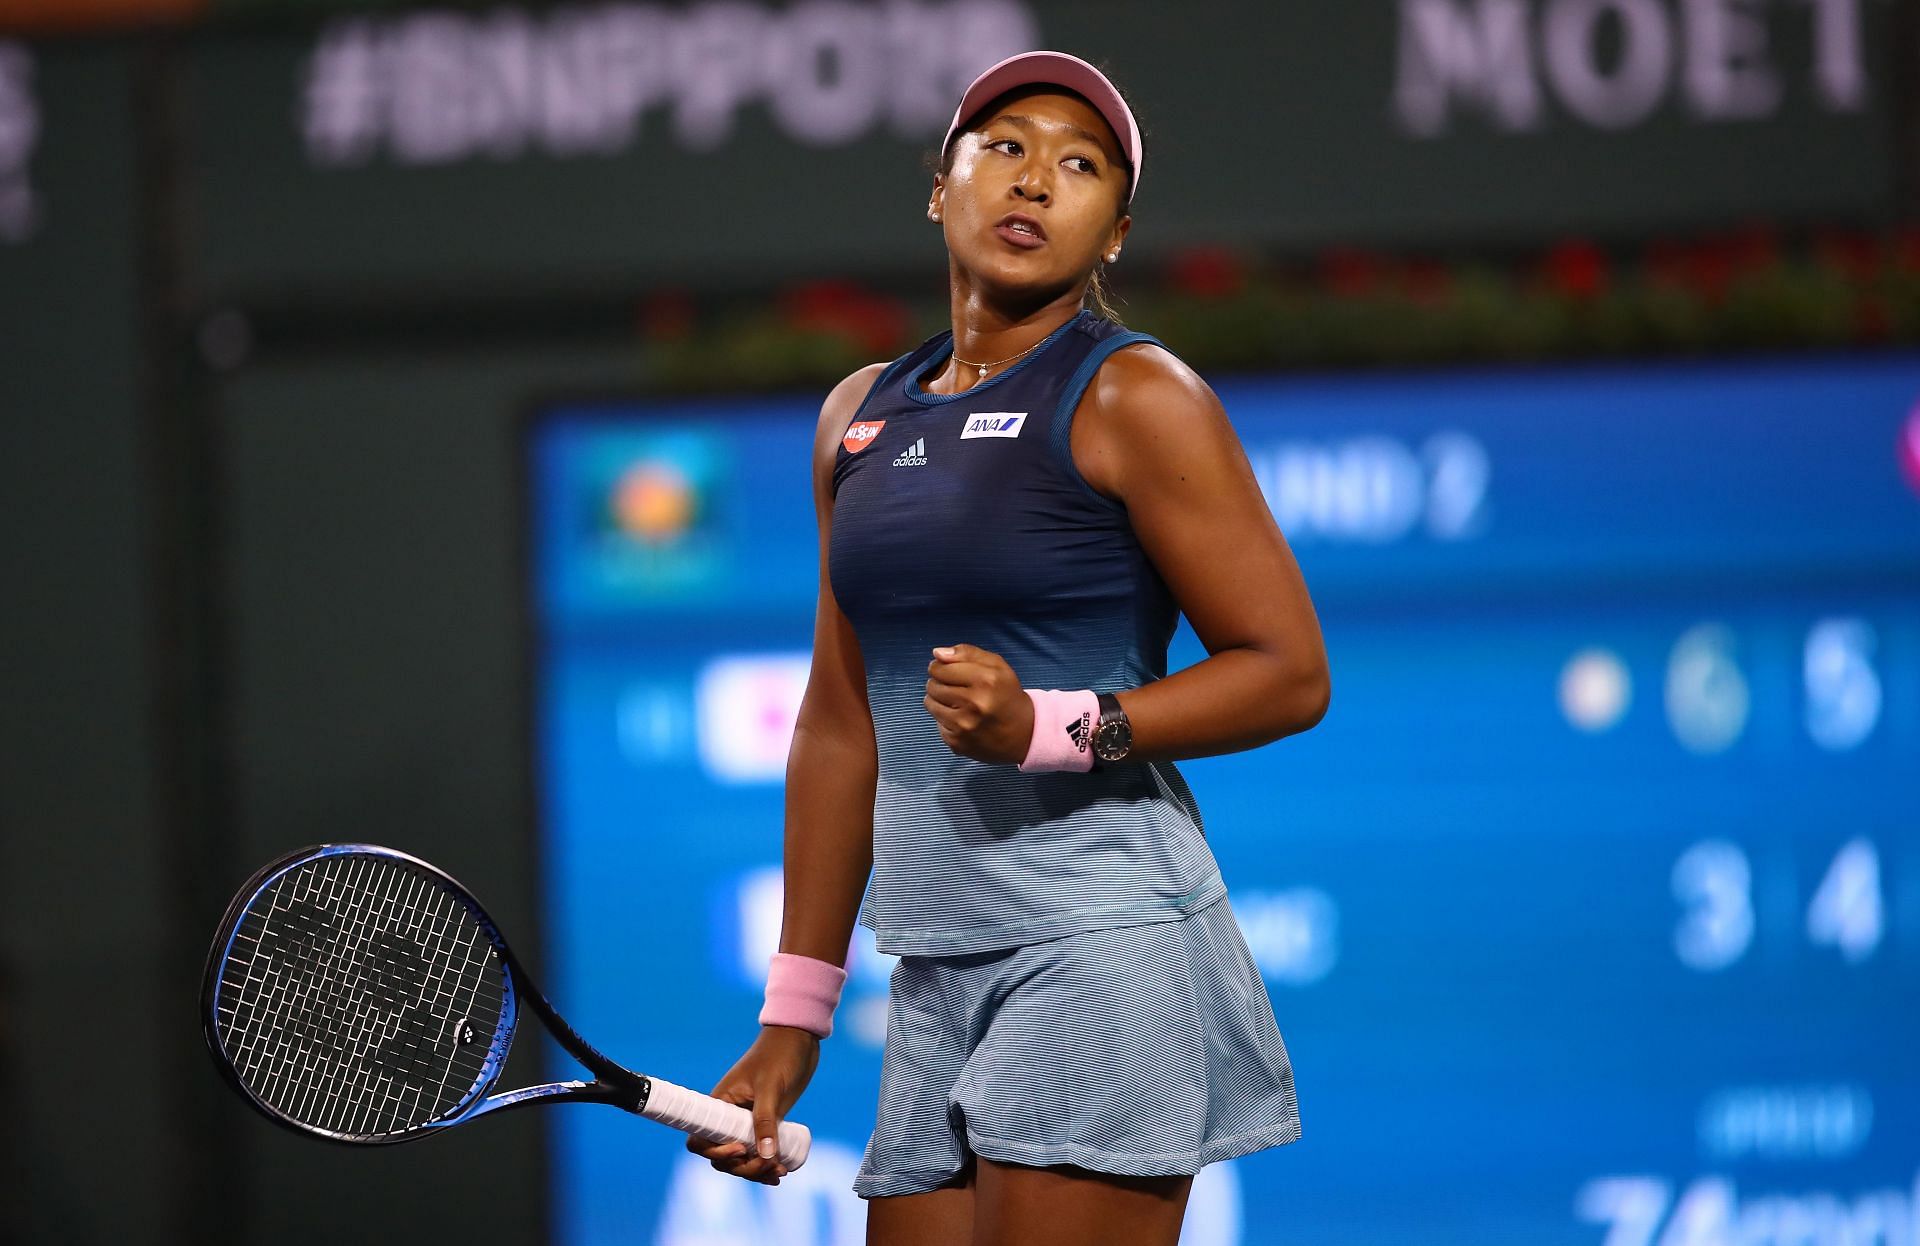 Naomi Osaka returns to action at the Indian Wells Open